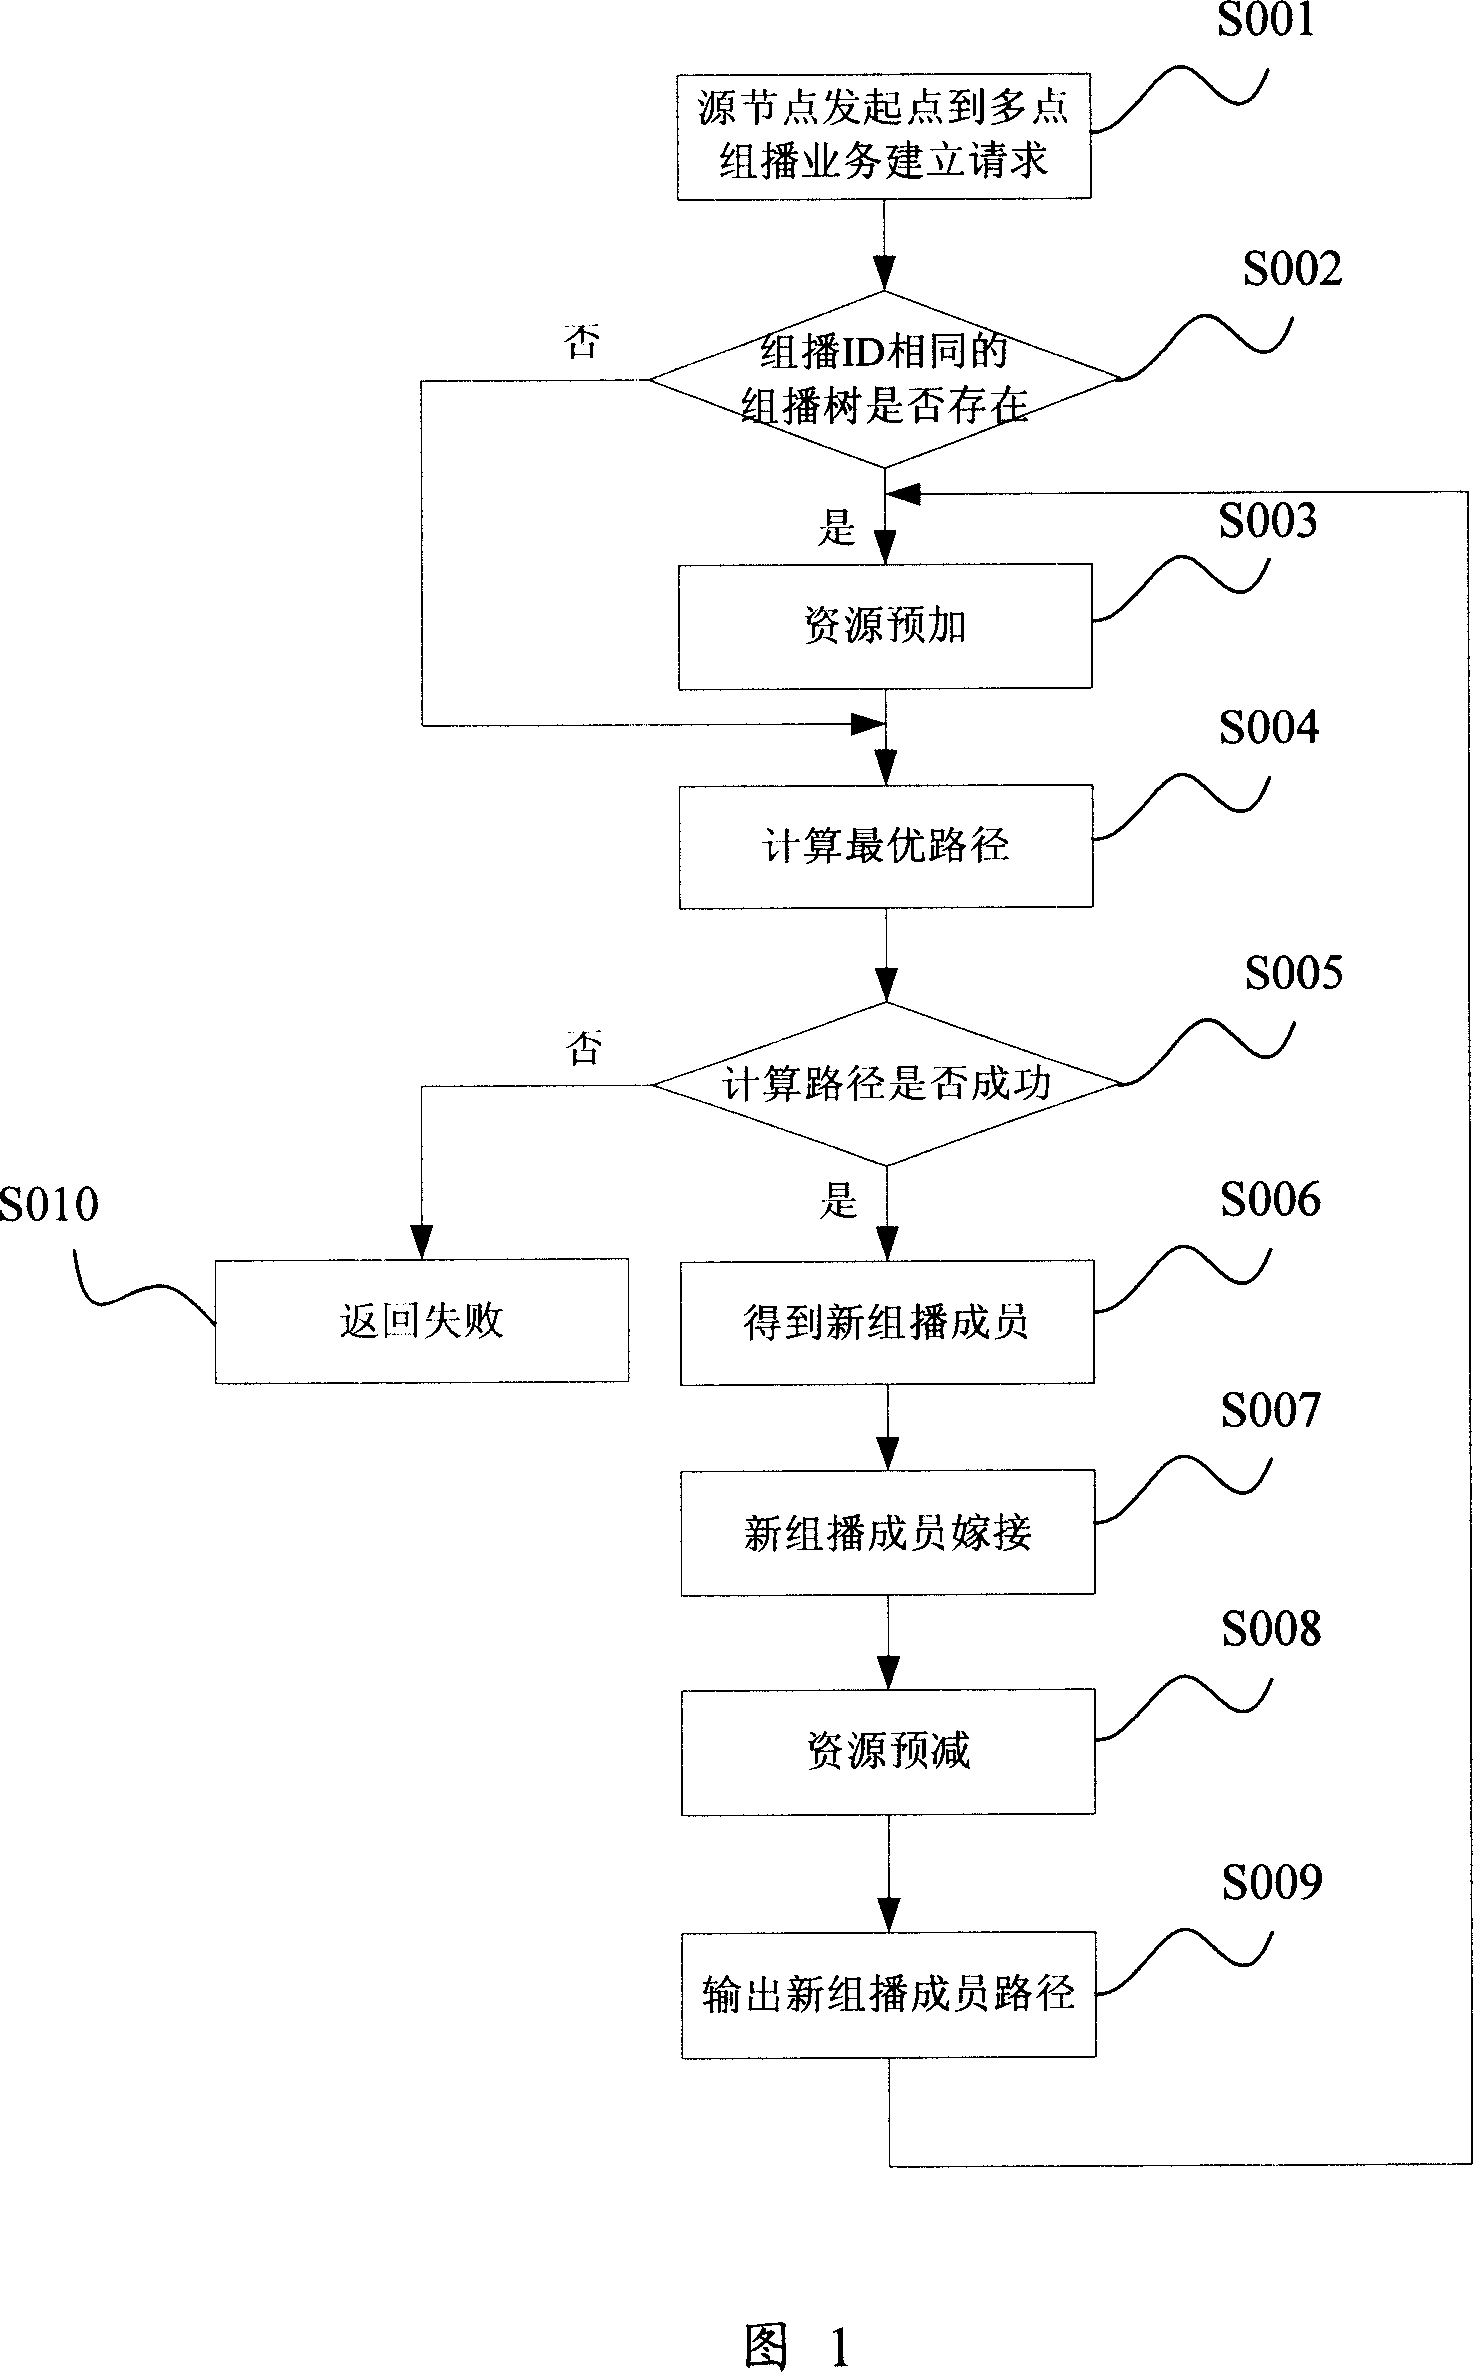 Dynamic management method for the multicast service members of the automatic switching optical network